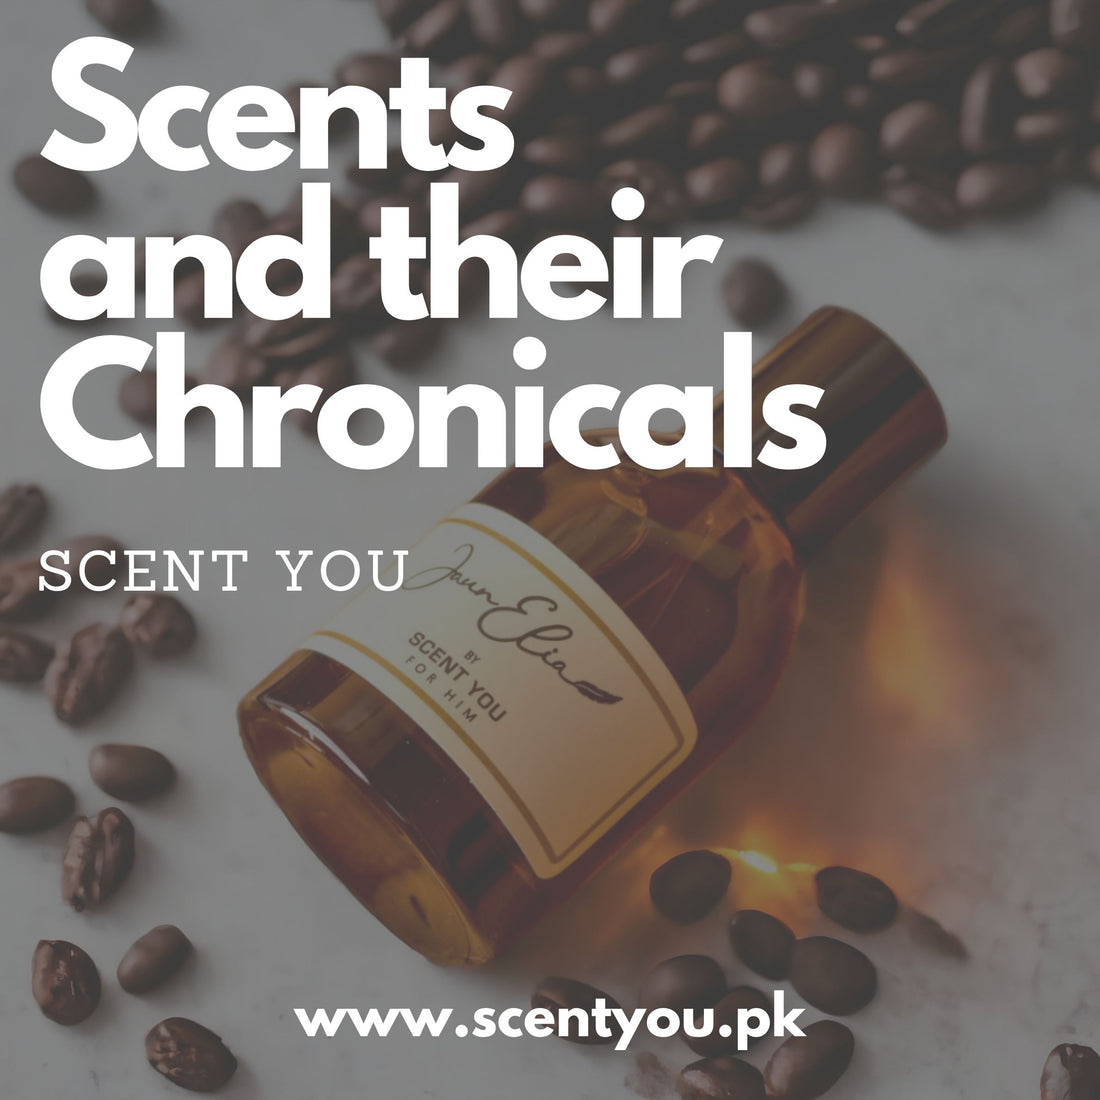 Scents have Stories/Chronicles: Find Your Signature Fragrance at Scent You